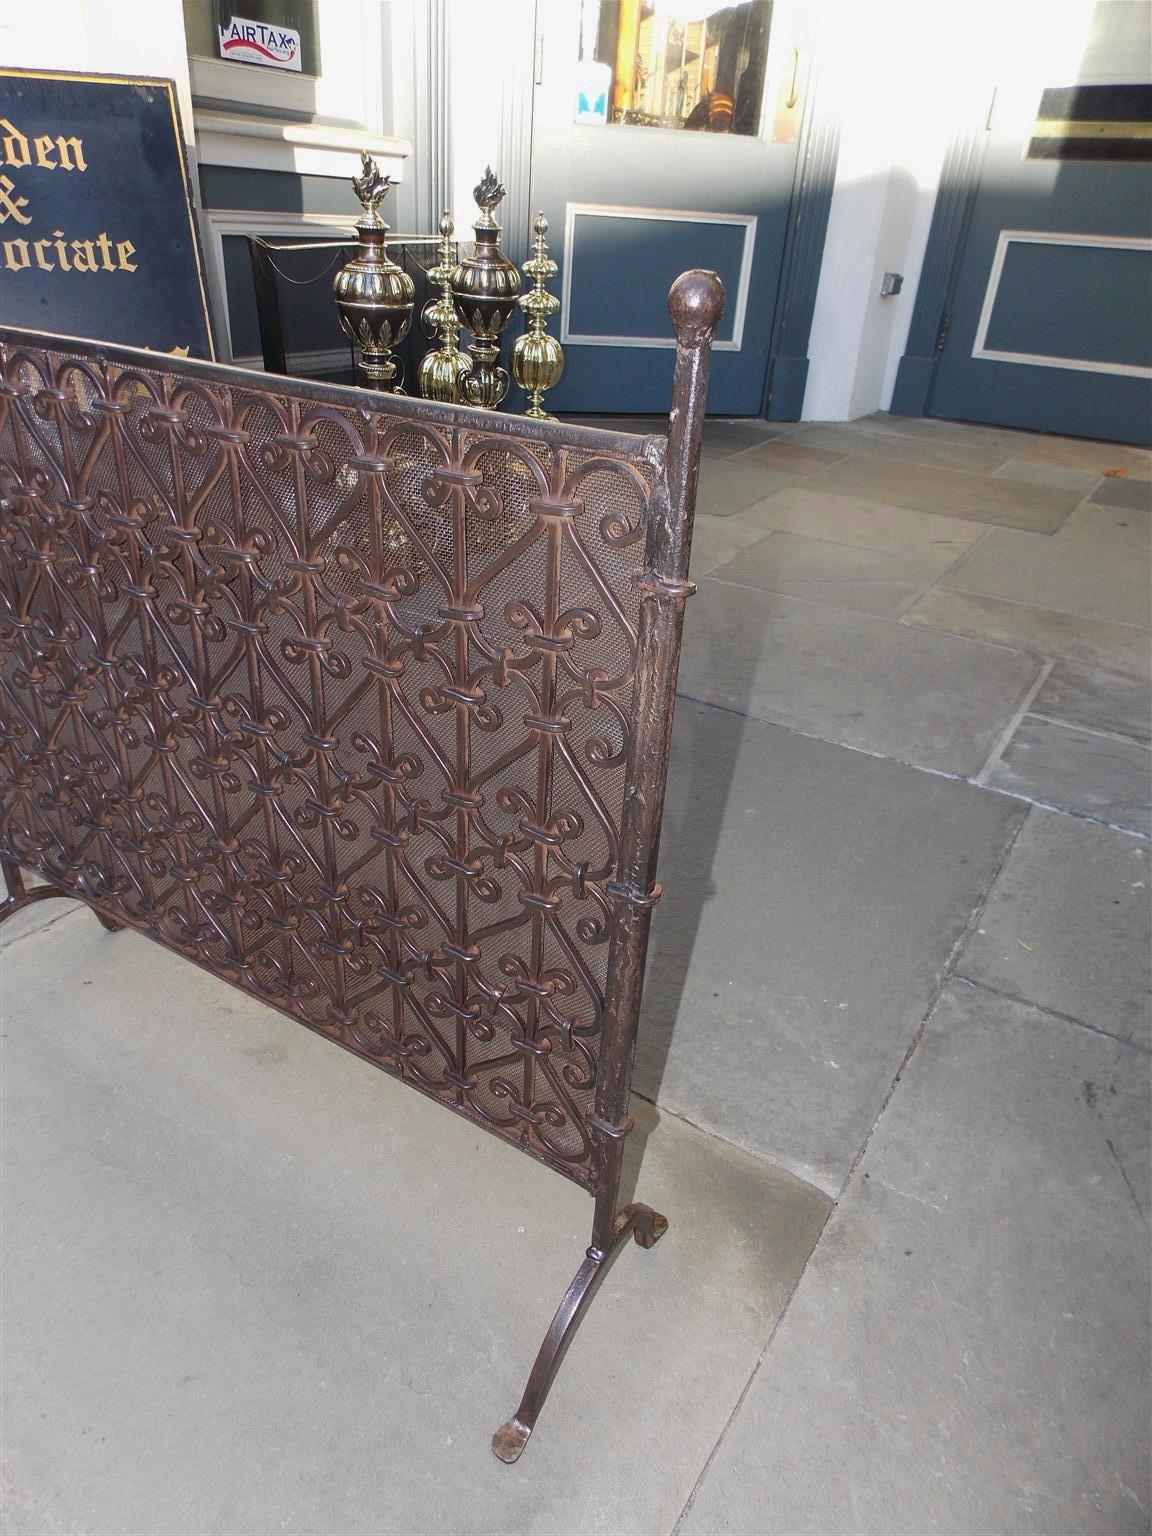 American Empire American Wrought Iron Ball Top Freestanding Fire Place Screen, Circa 1820 For Sale